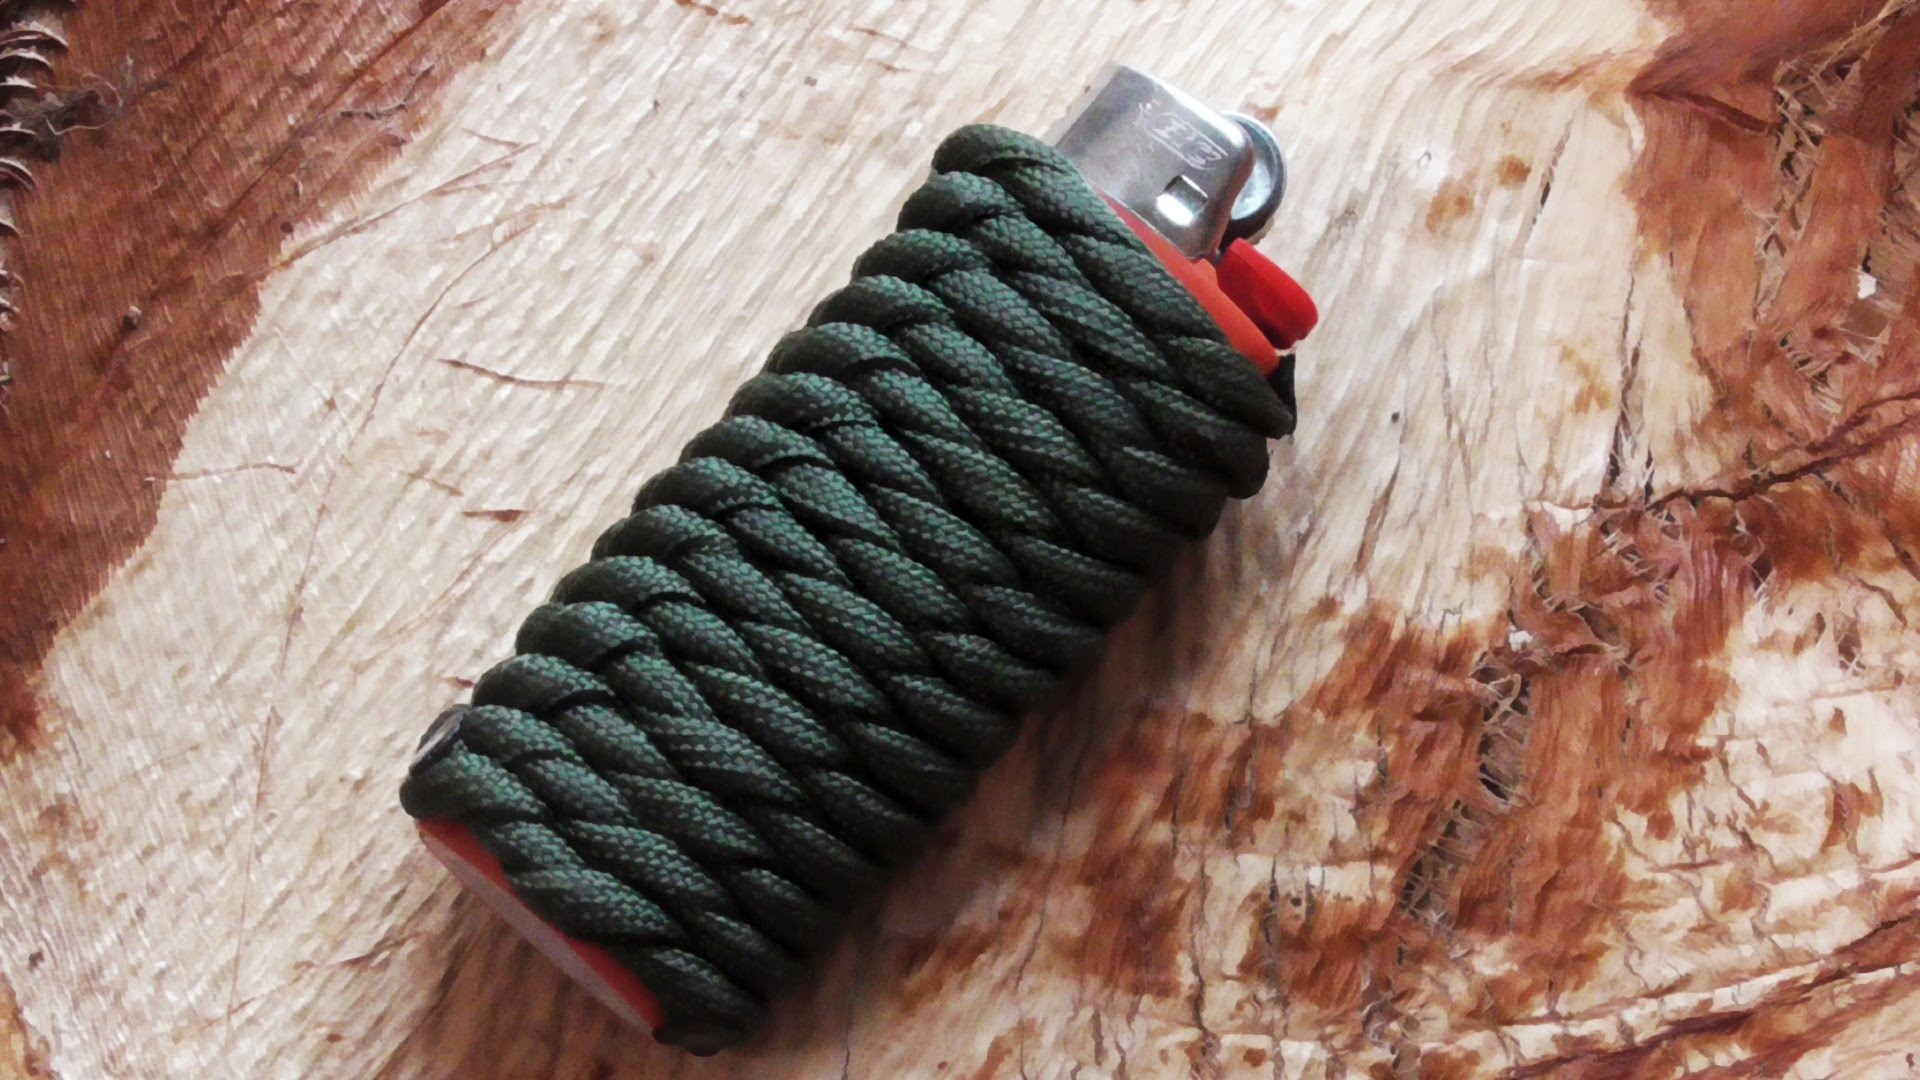 How,To,Do,A,Paracord,Lighter,Wrap,Learn,how,to,make,a,paracord,lighter,wrap...